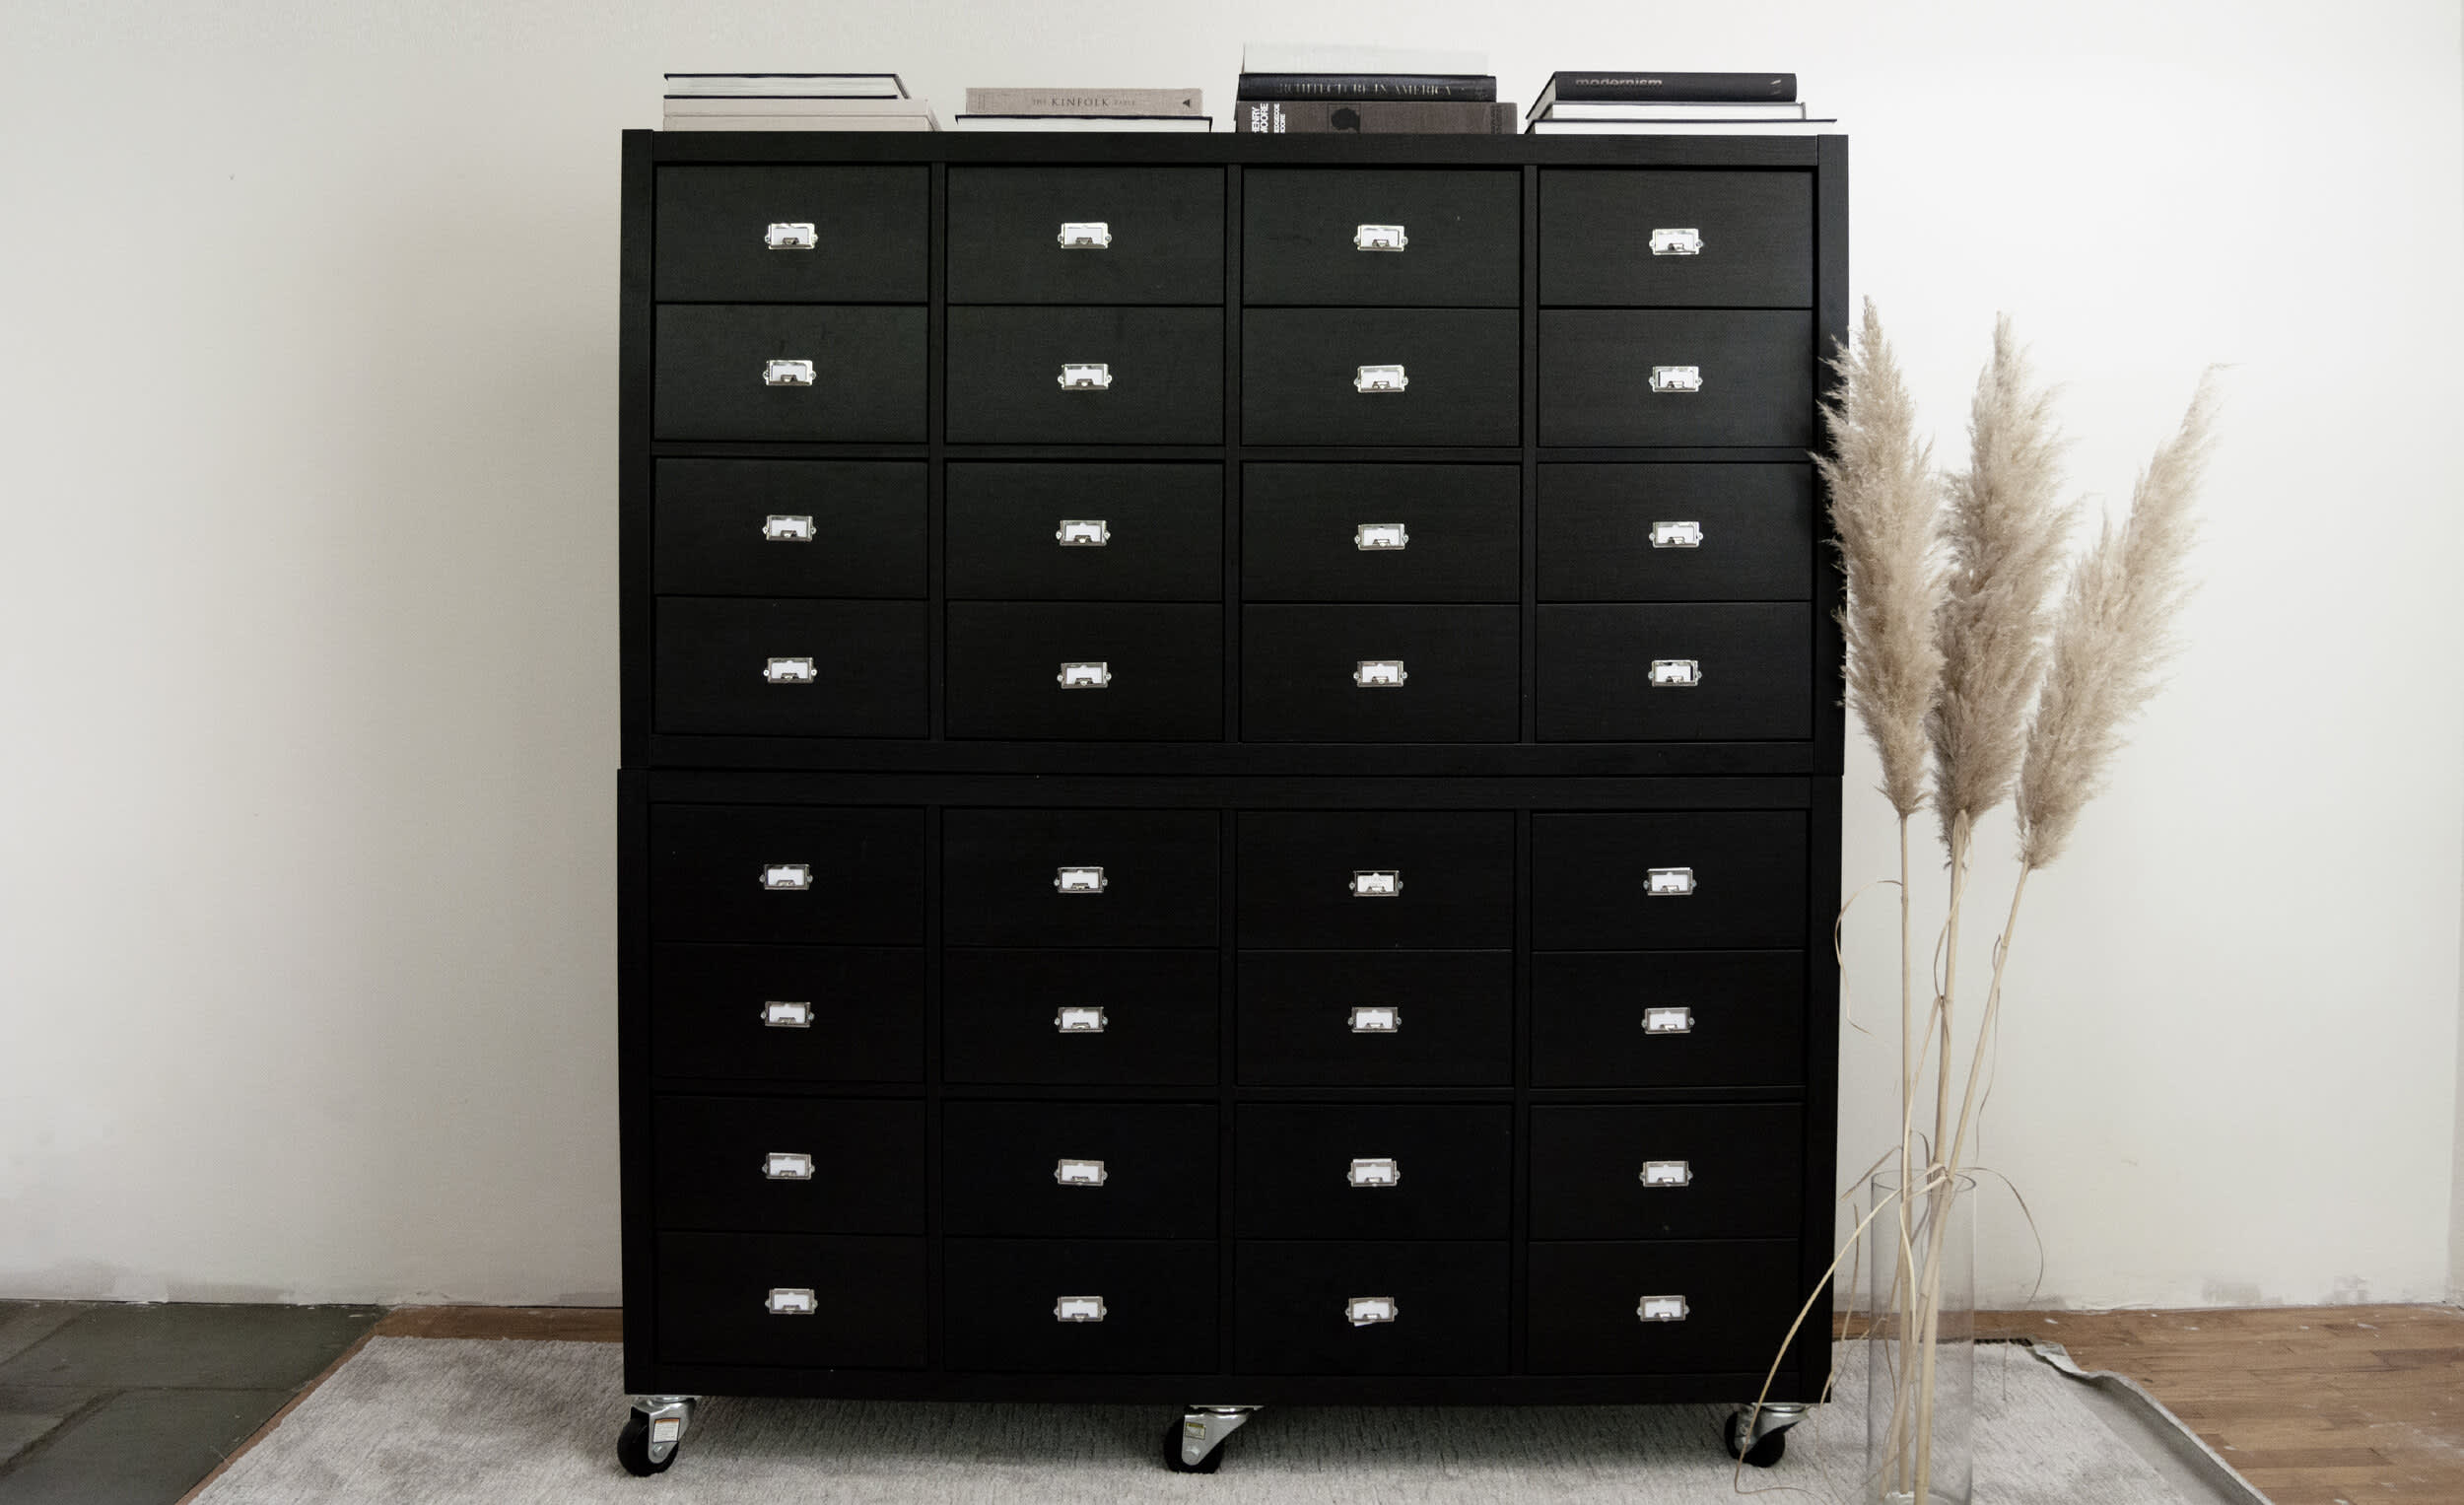 DIY Ikea Hack with Kallax Shelves and Drawers Library Card Catalog Apothecary Cabinet